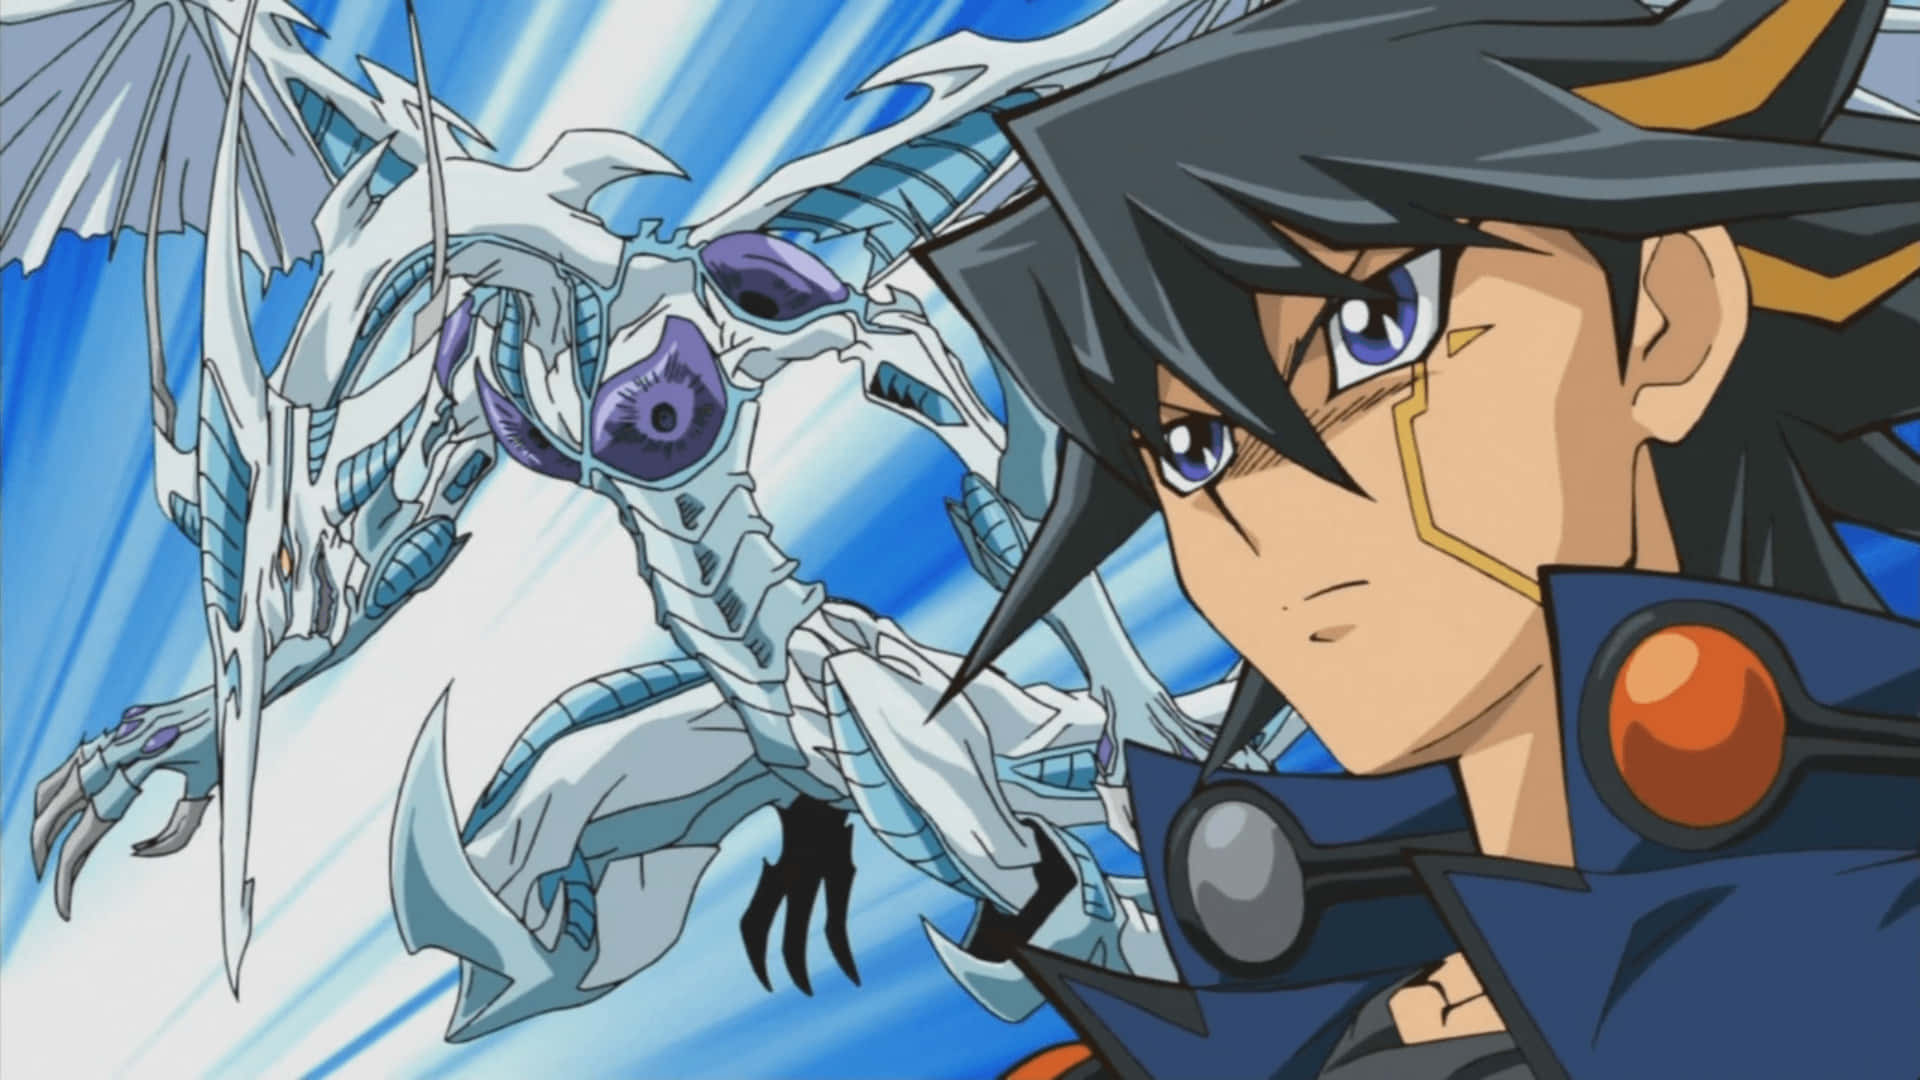 Yusei Fudo, the Master Duelist from Yu-Gi-Oh! 5D's Wallpaper